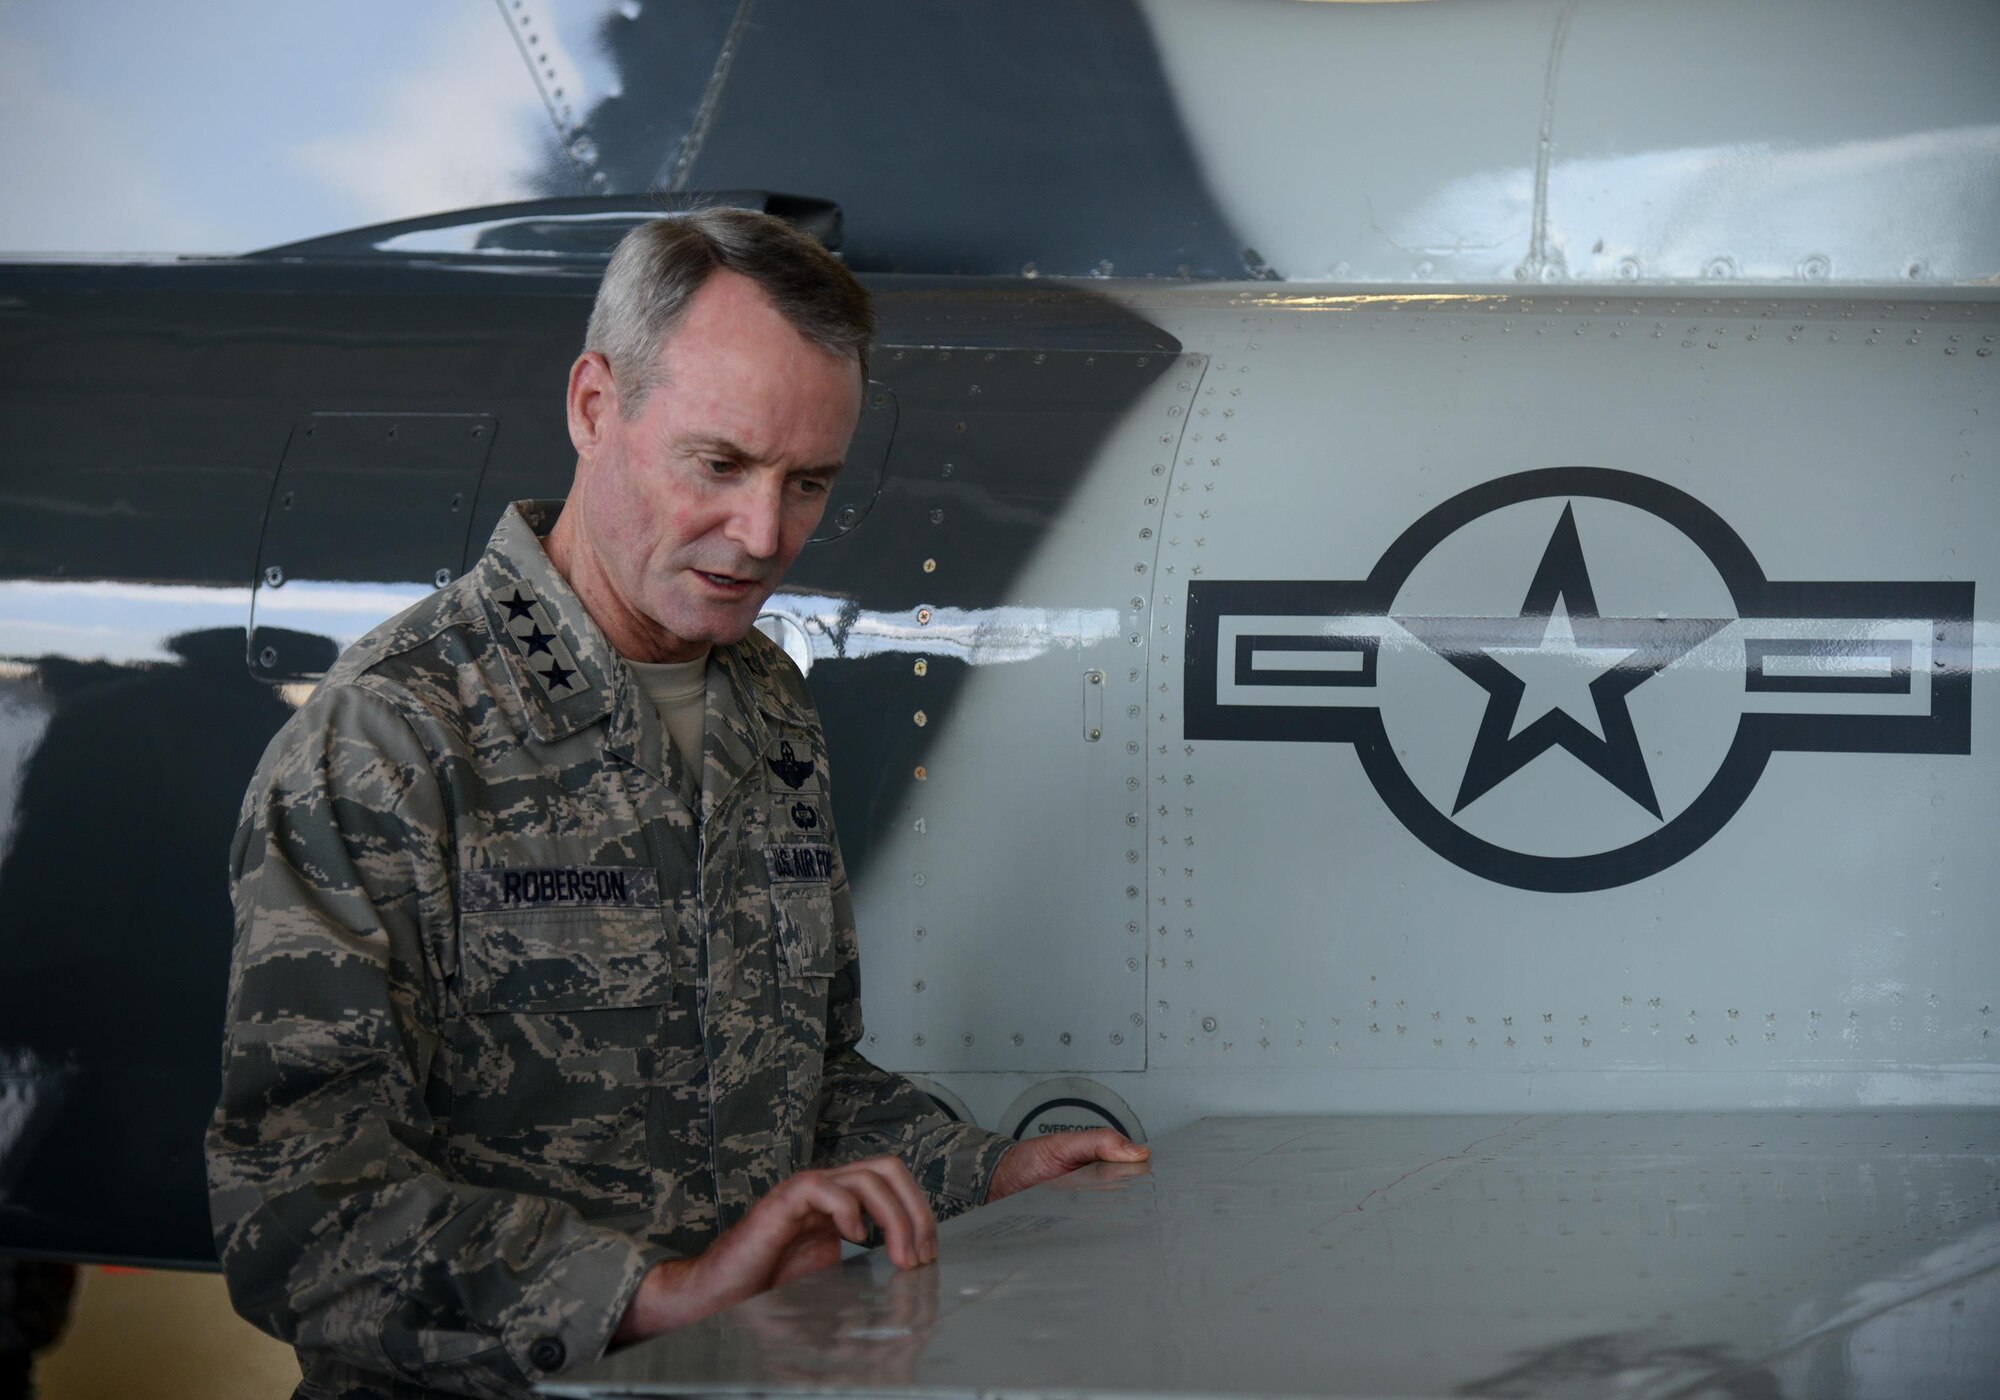 Lt. Gen. Darryl Roberson, commander of Air Education and Training Command, examines the wing of a hail-damaged T-38 Talon at Laughlin Air Force Base, Texas, March 16, 2016, during a base tour. While touring Laughlin, Roberson held an all-call, visited various base agencies and discussed operations with wing leaders. (U.S. Air Force photo by Airman 1st Class Brandon May) 